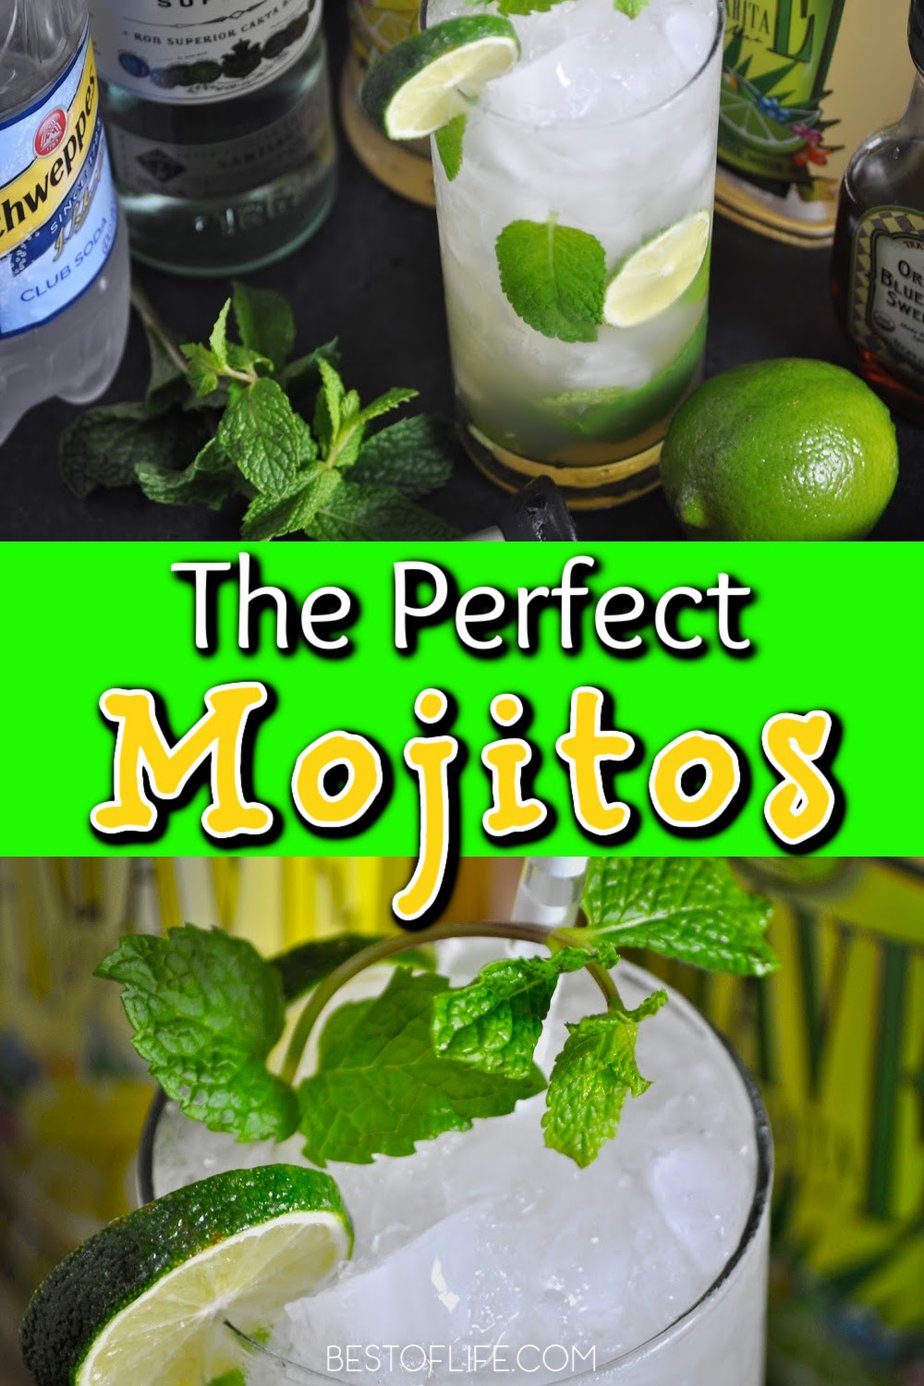 How To Make The Perfect Mojito Shopping List And Tips The Best Of Life,How Long To Grill Corn On The Cob In Foil